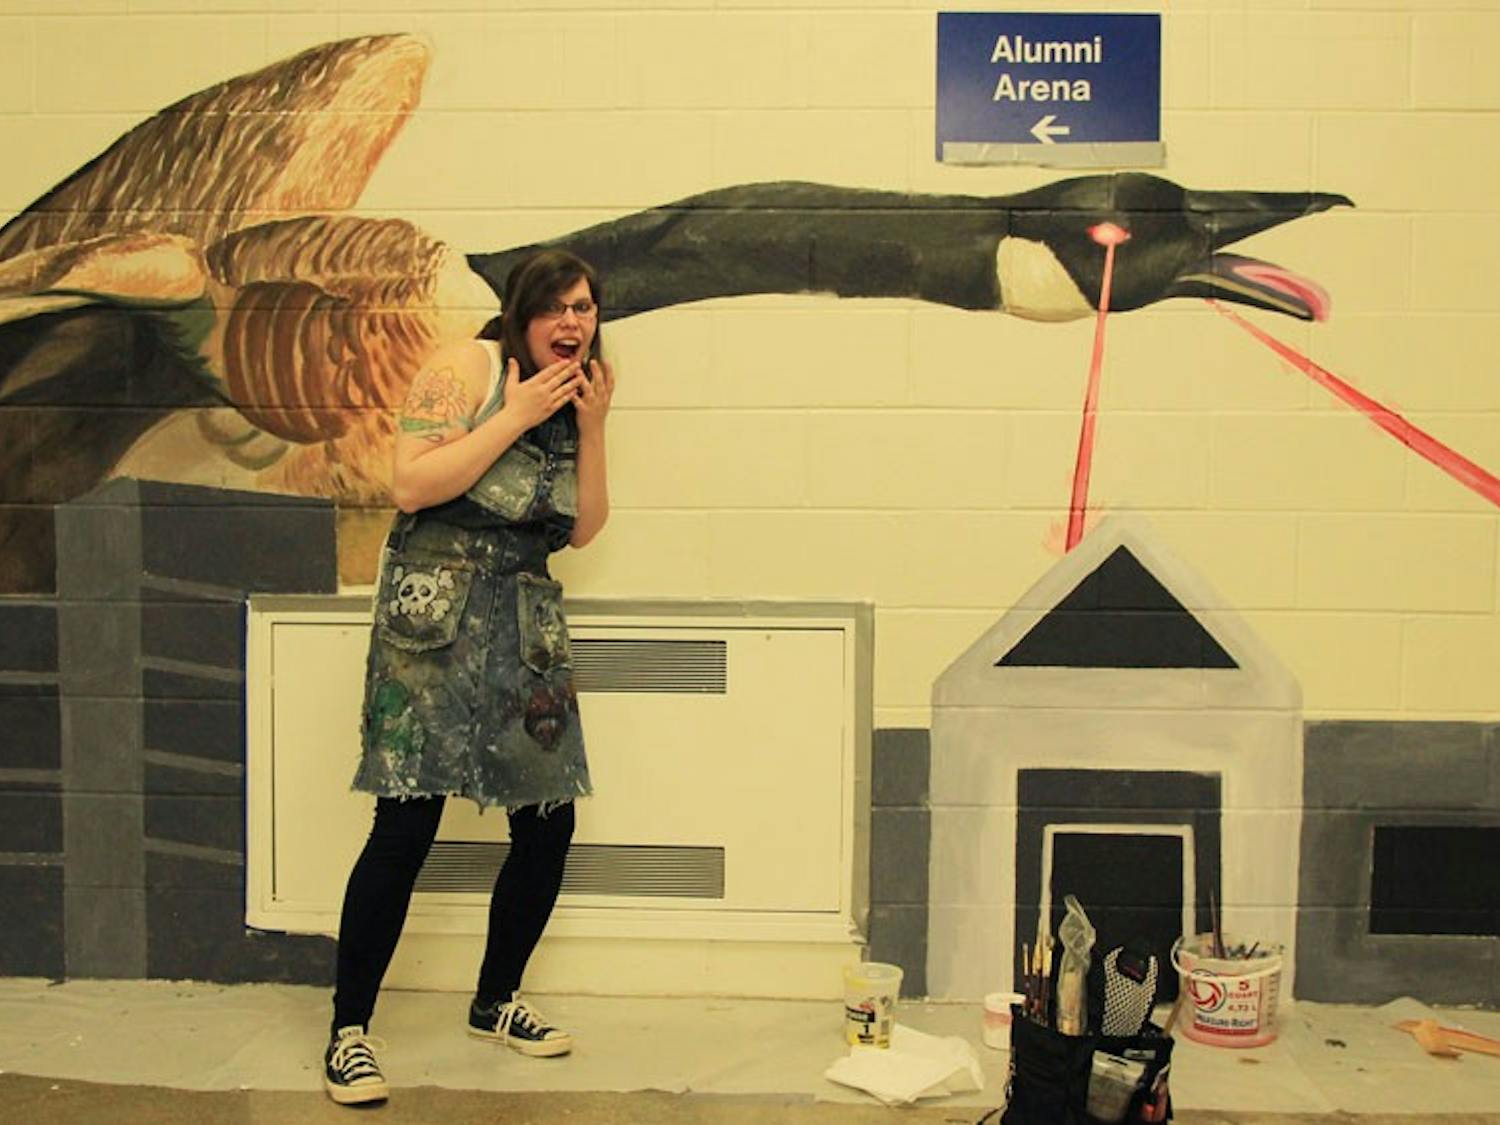 Senior fine arts student Cassara Martin’s giant, super goose shoots burning lasers in her mural, her humorous conceptualization of UB’s annual goose invasion.